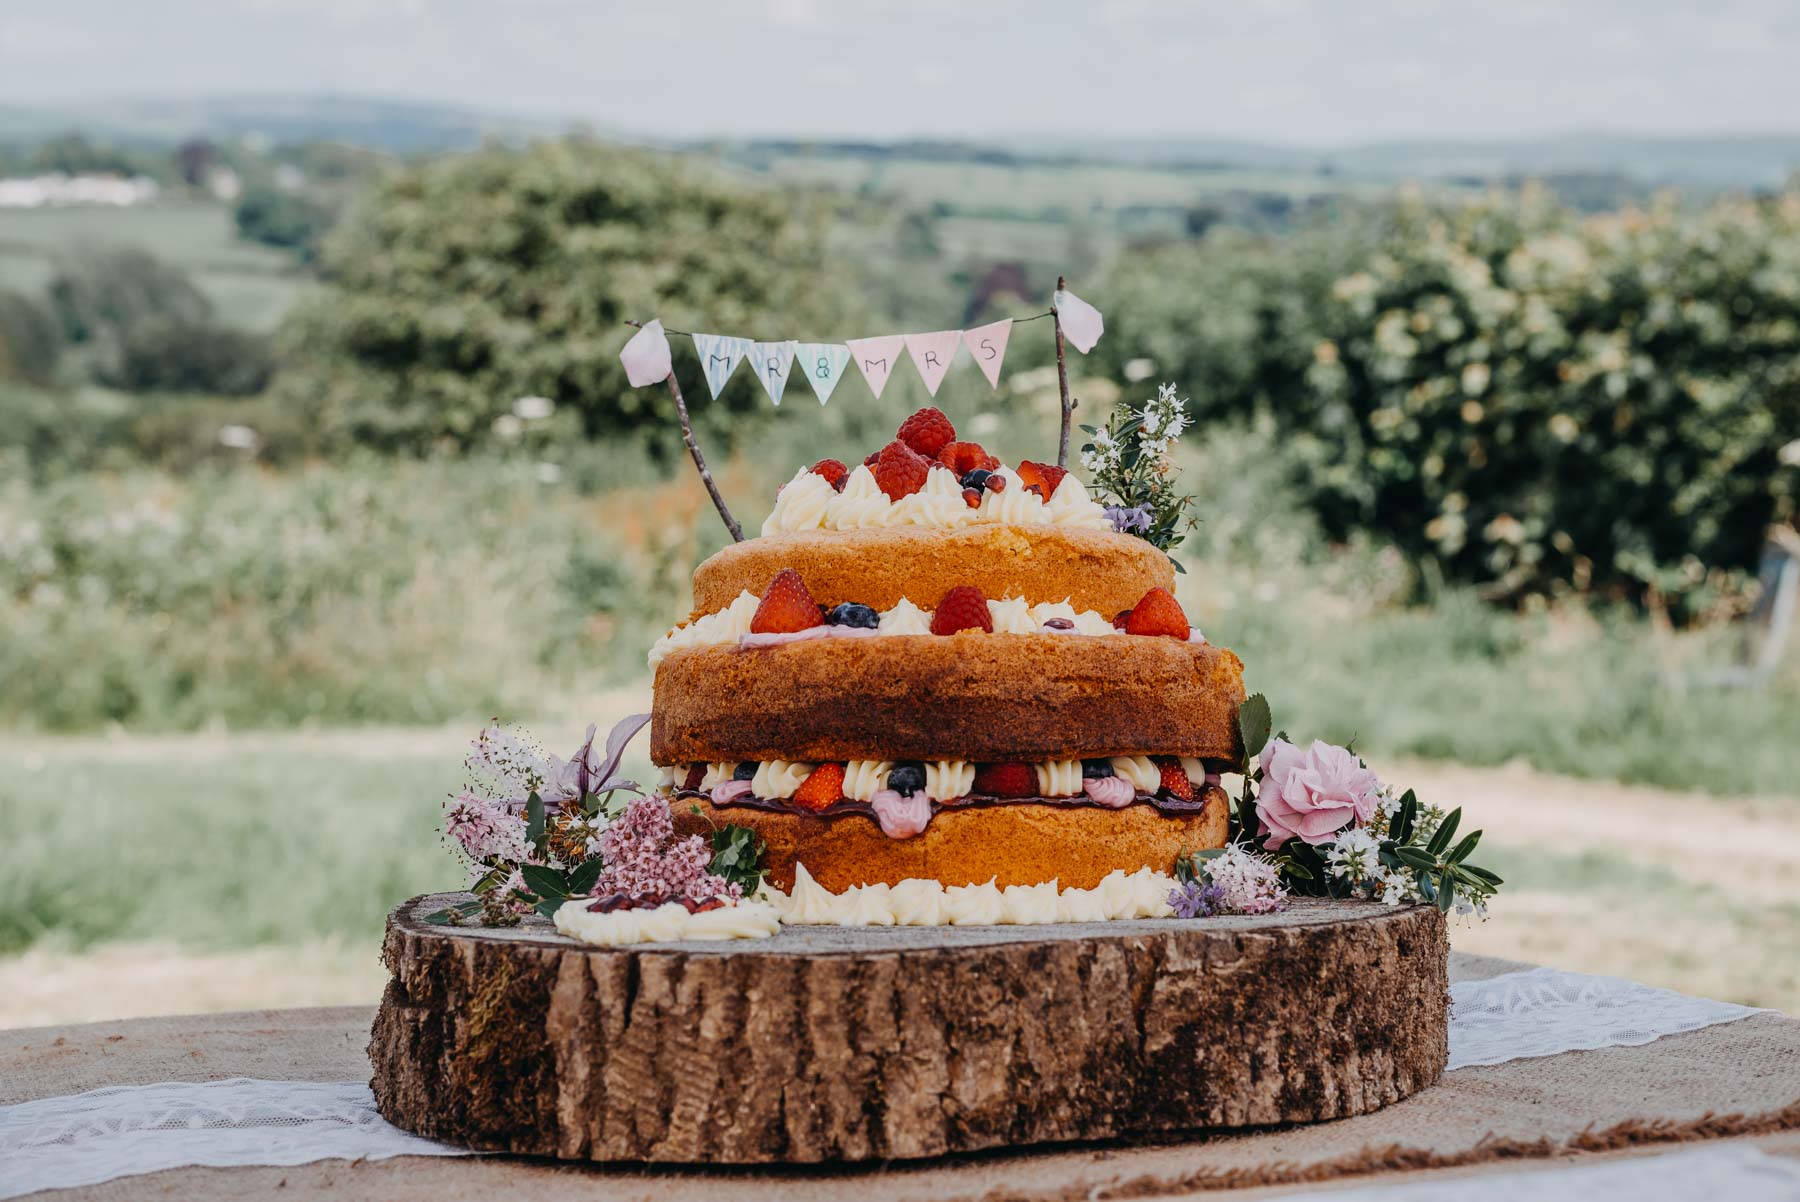 The cake in the handfasting ceremony